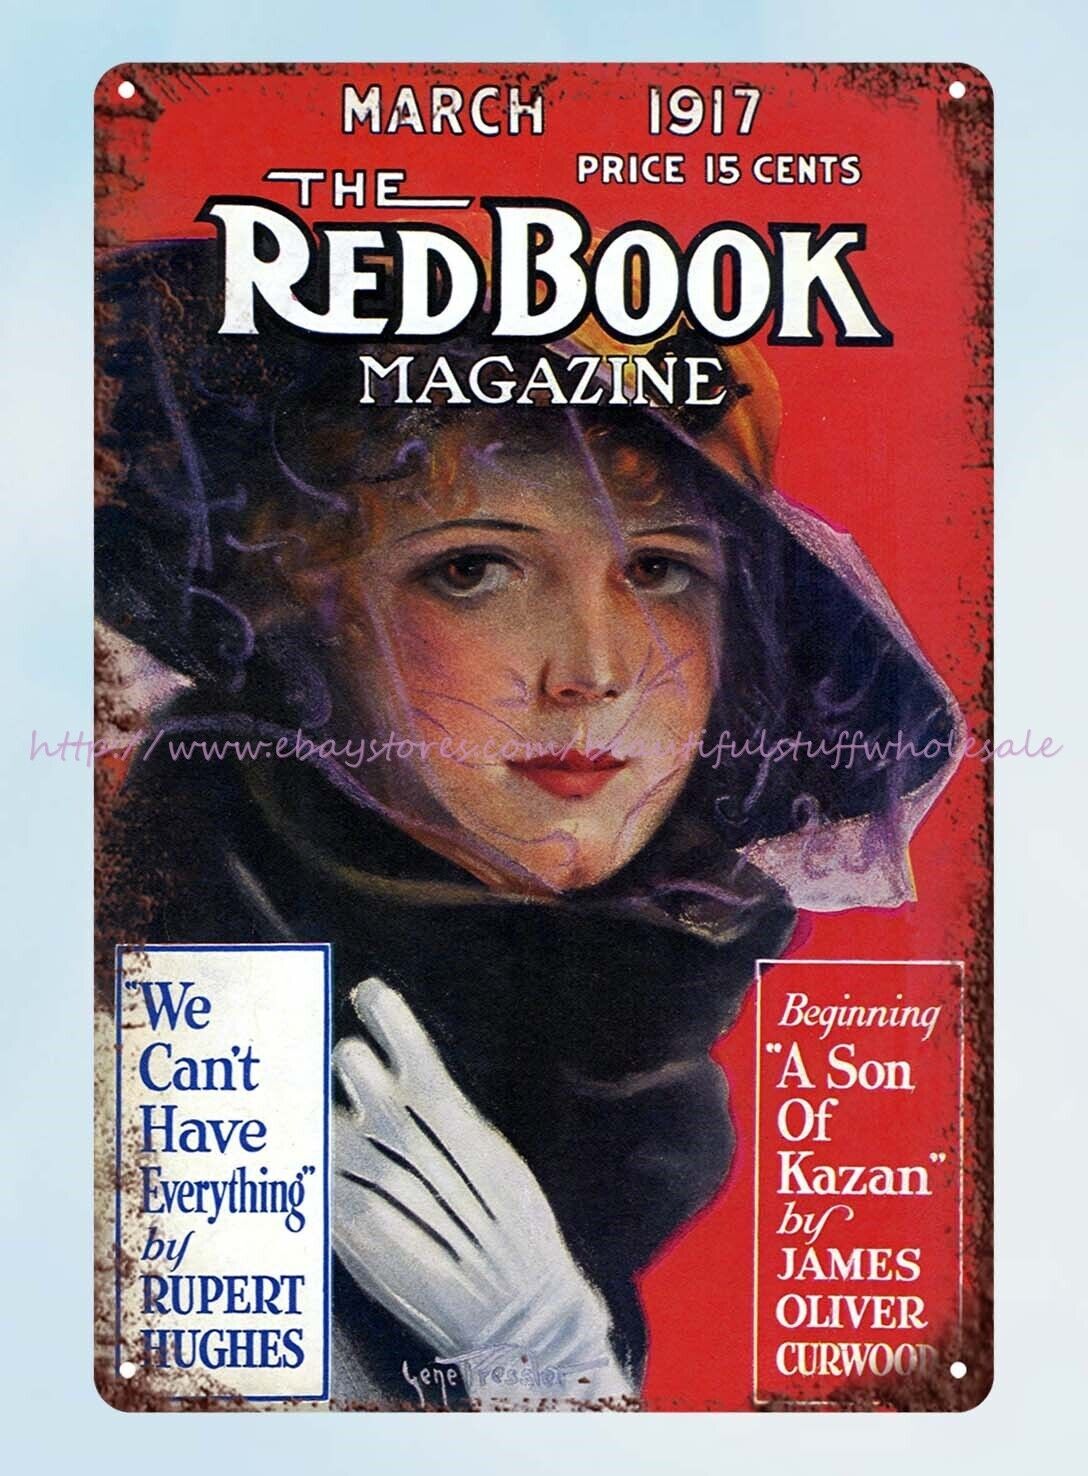 March 1917 issue of The Redbook Magazine Cover metal tin sign discount wall art